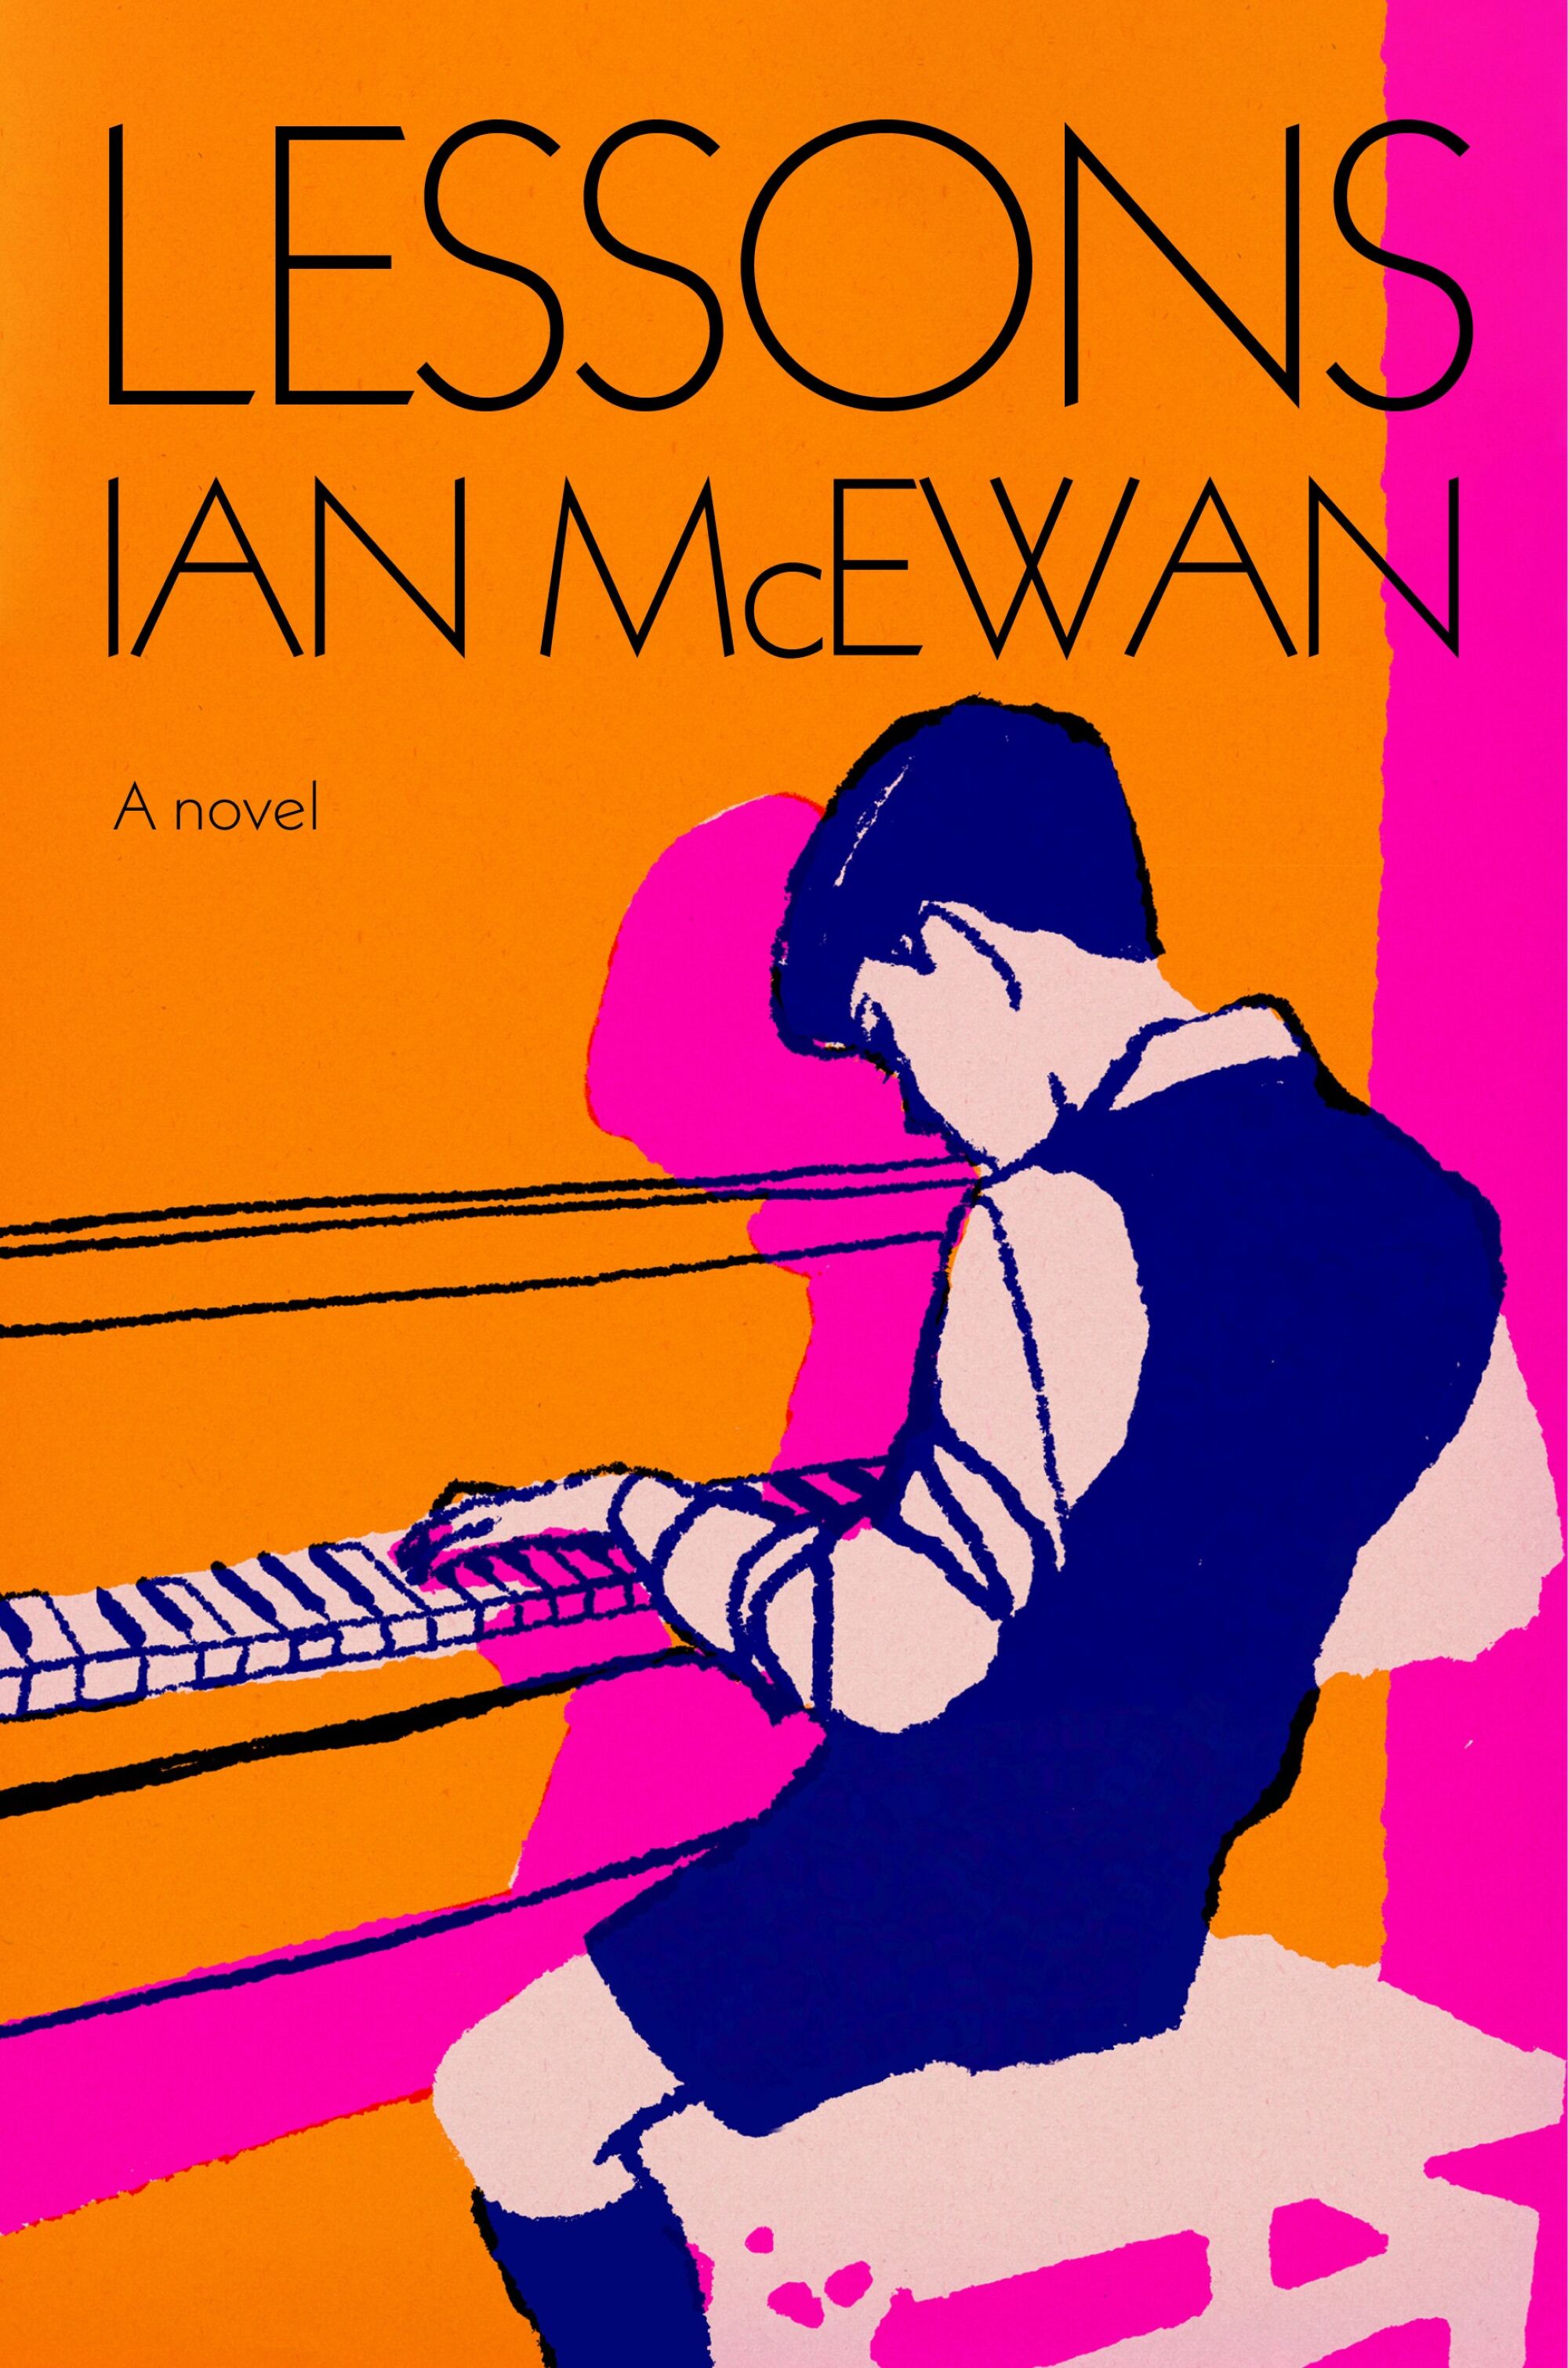 orange and pink illustration of a boy playing the piano on the cover of "Lessons: a novel" by Ian McEwan